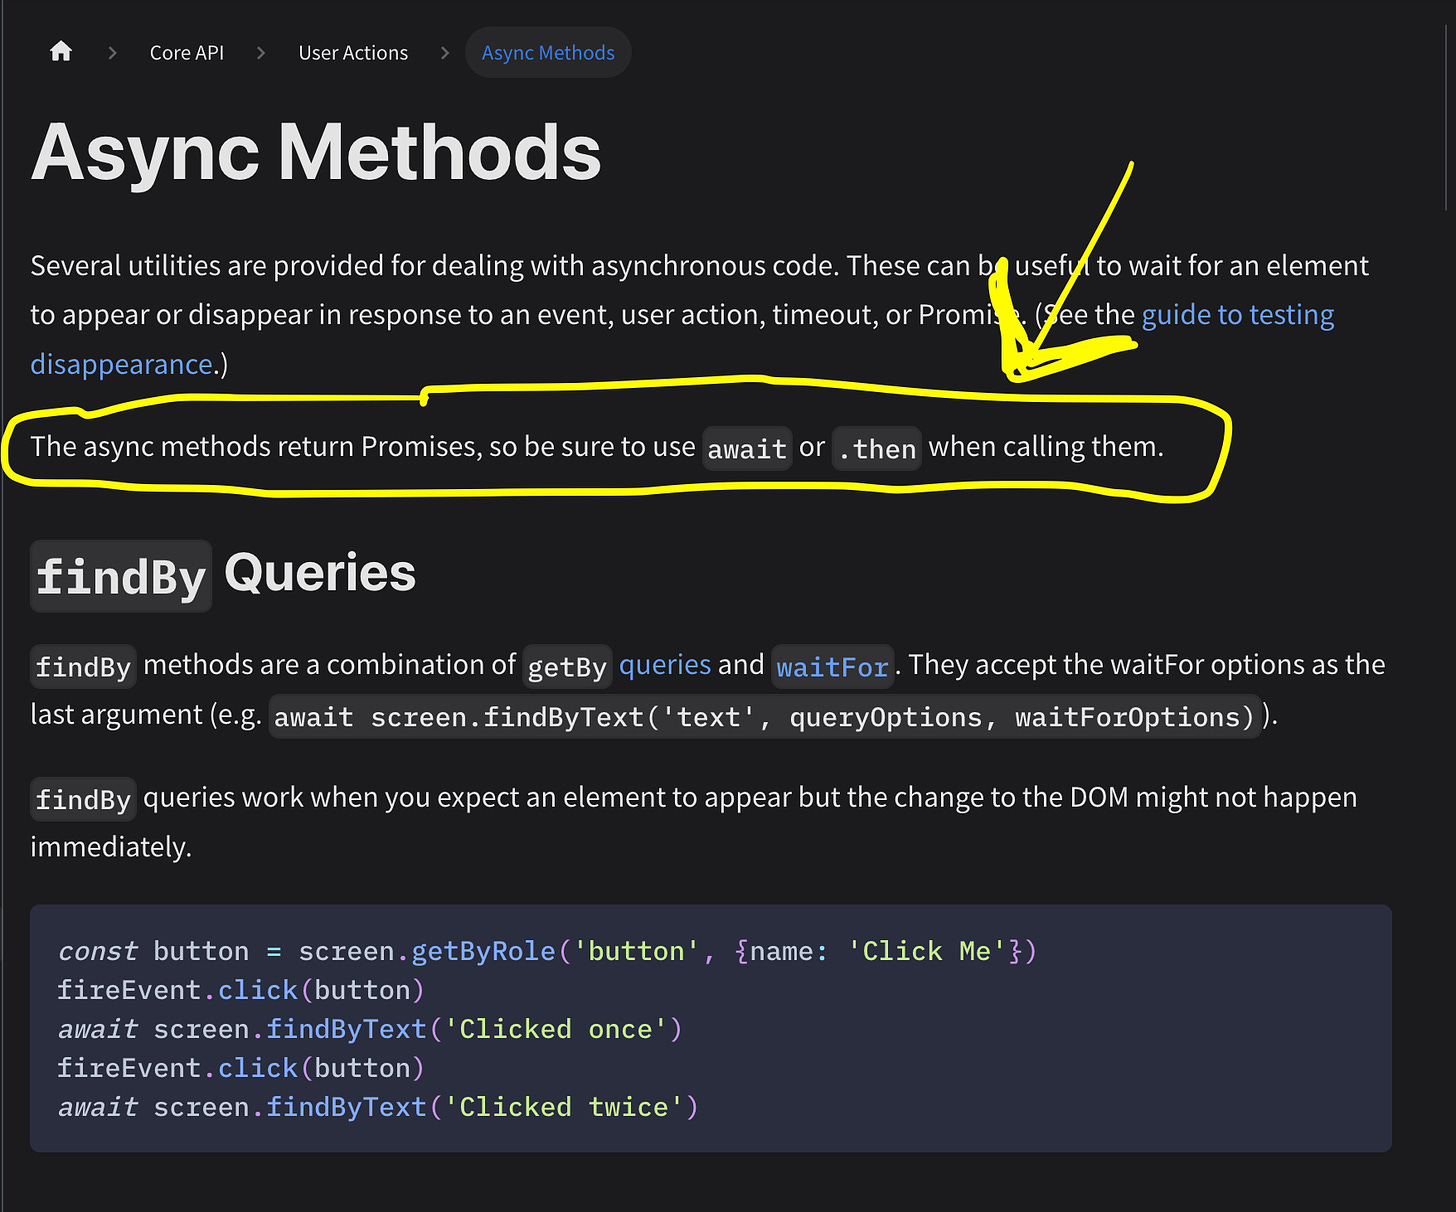 The async methods return Promises, so be sure to use await or .then when calling them.